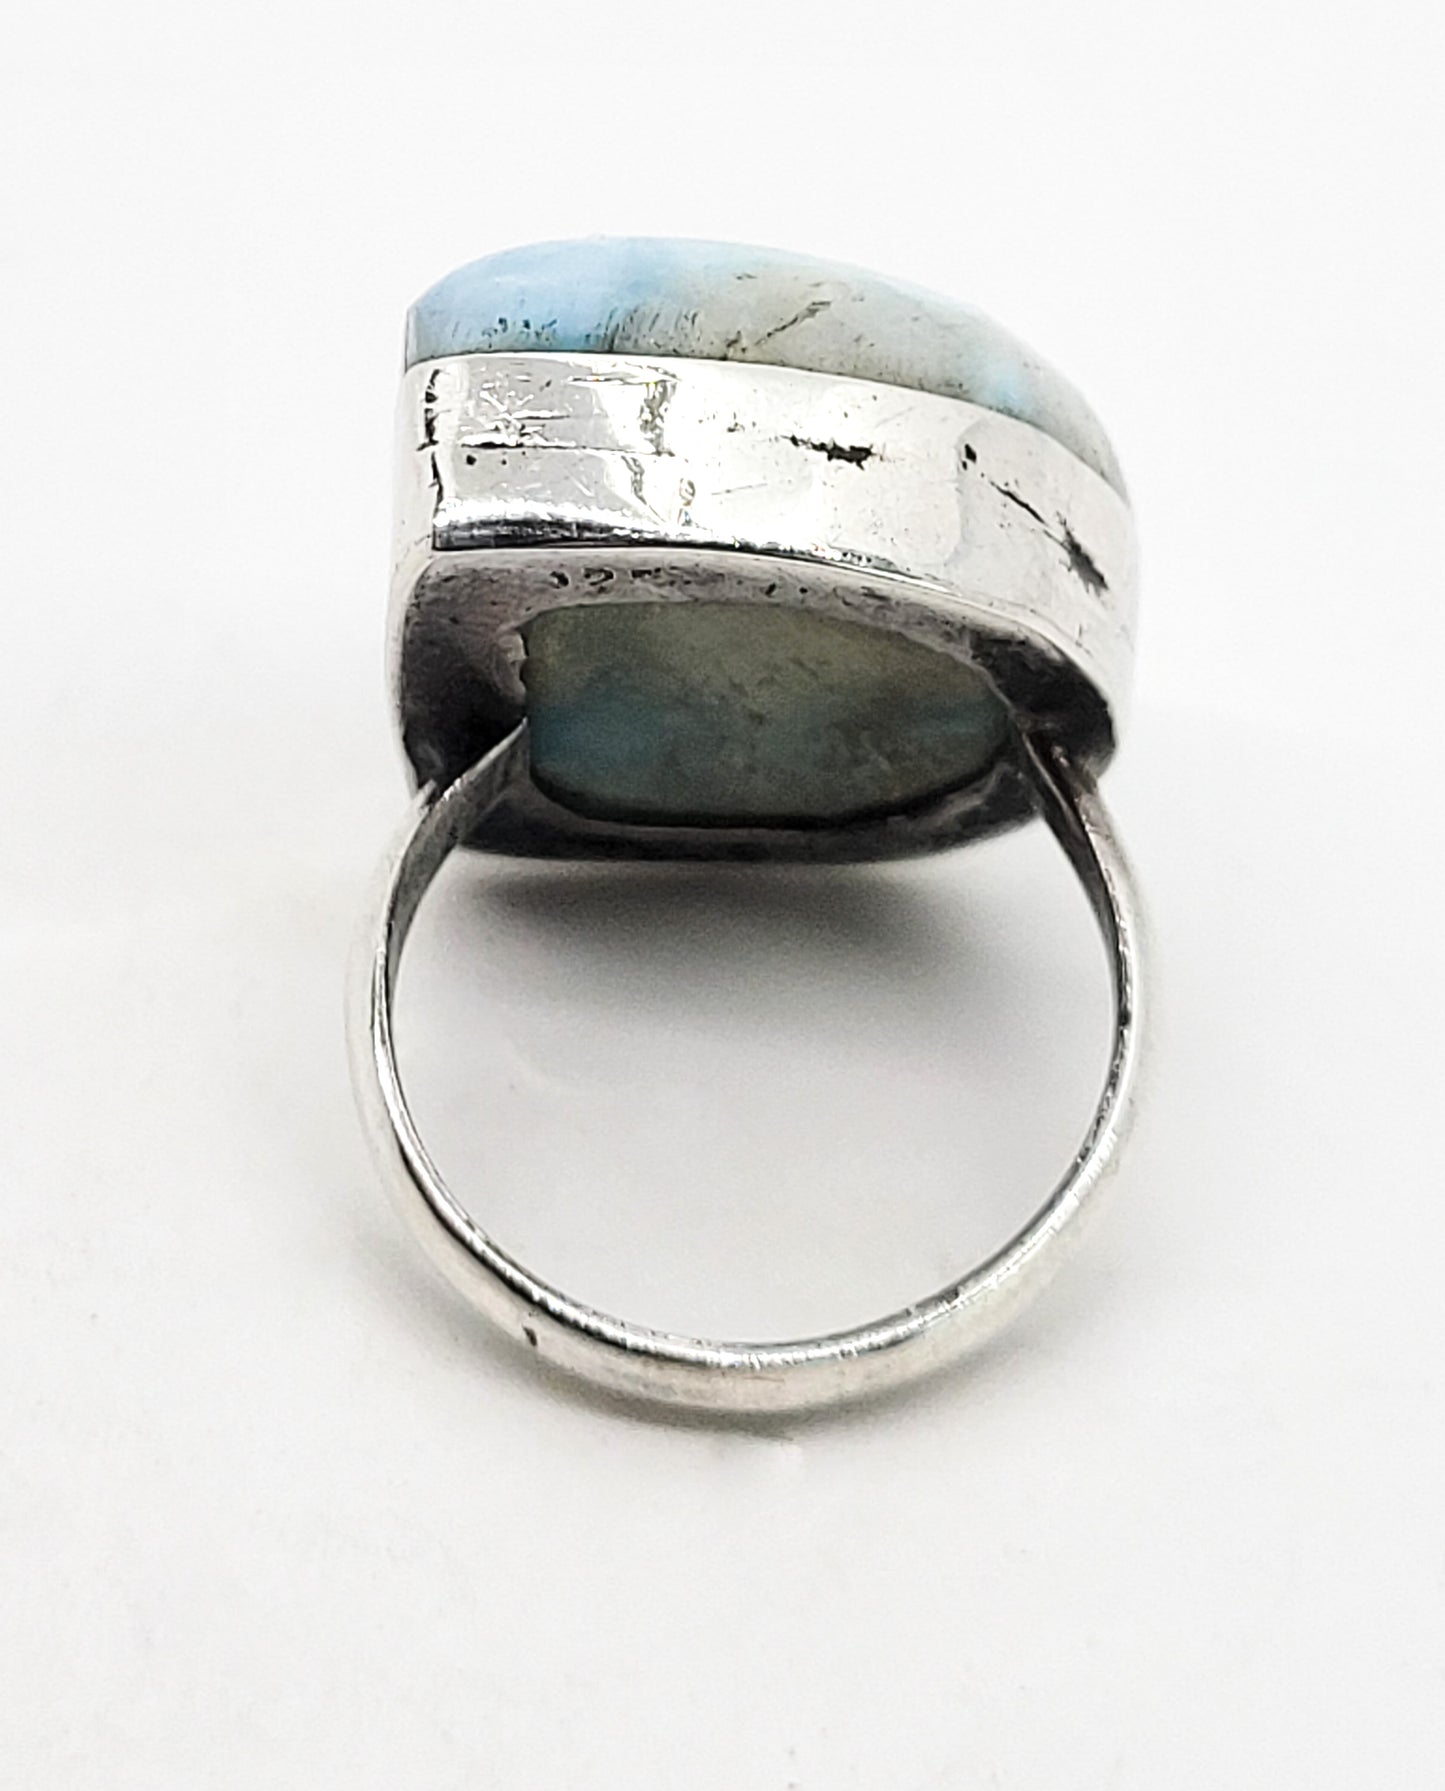 Large Dominican Larimar blue gemstone sterling silver ring size 7